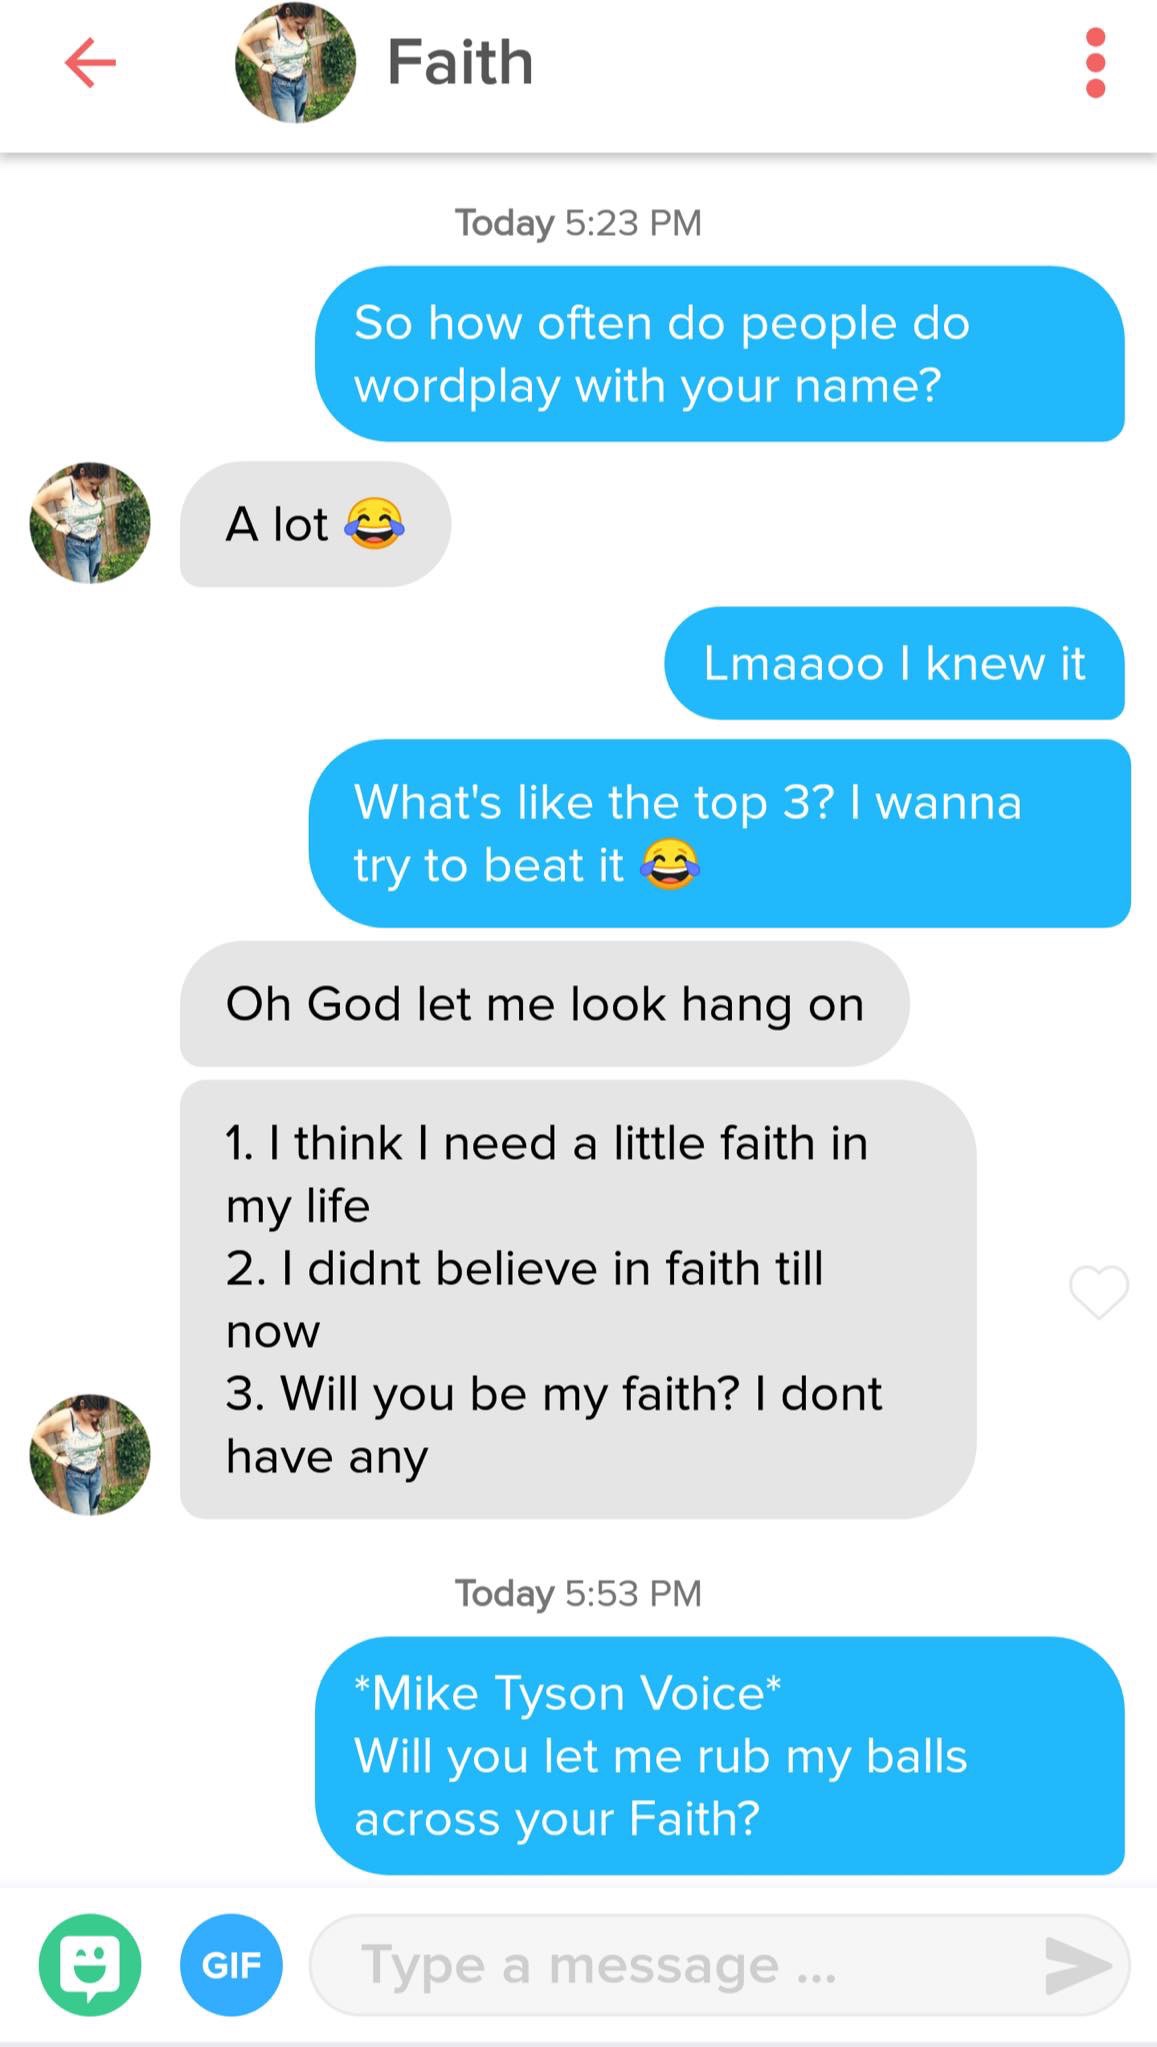 tinder - tinder fail - Faith Faith Today So how often do people do wordplay with your name? A lot og Lmaaoo I knew it What's the top 3? I wanna try to beat it Oh God let me look hang on 1. I think I need a little faith in my life 2. I didnt believe in fai